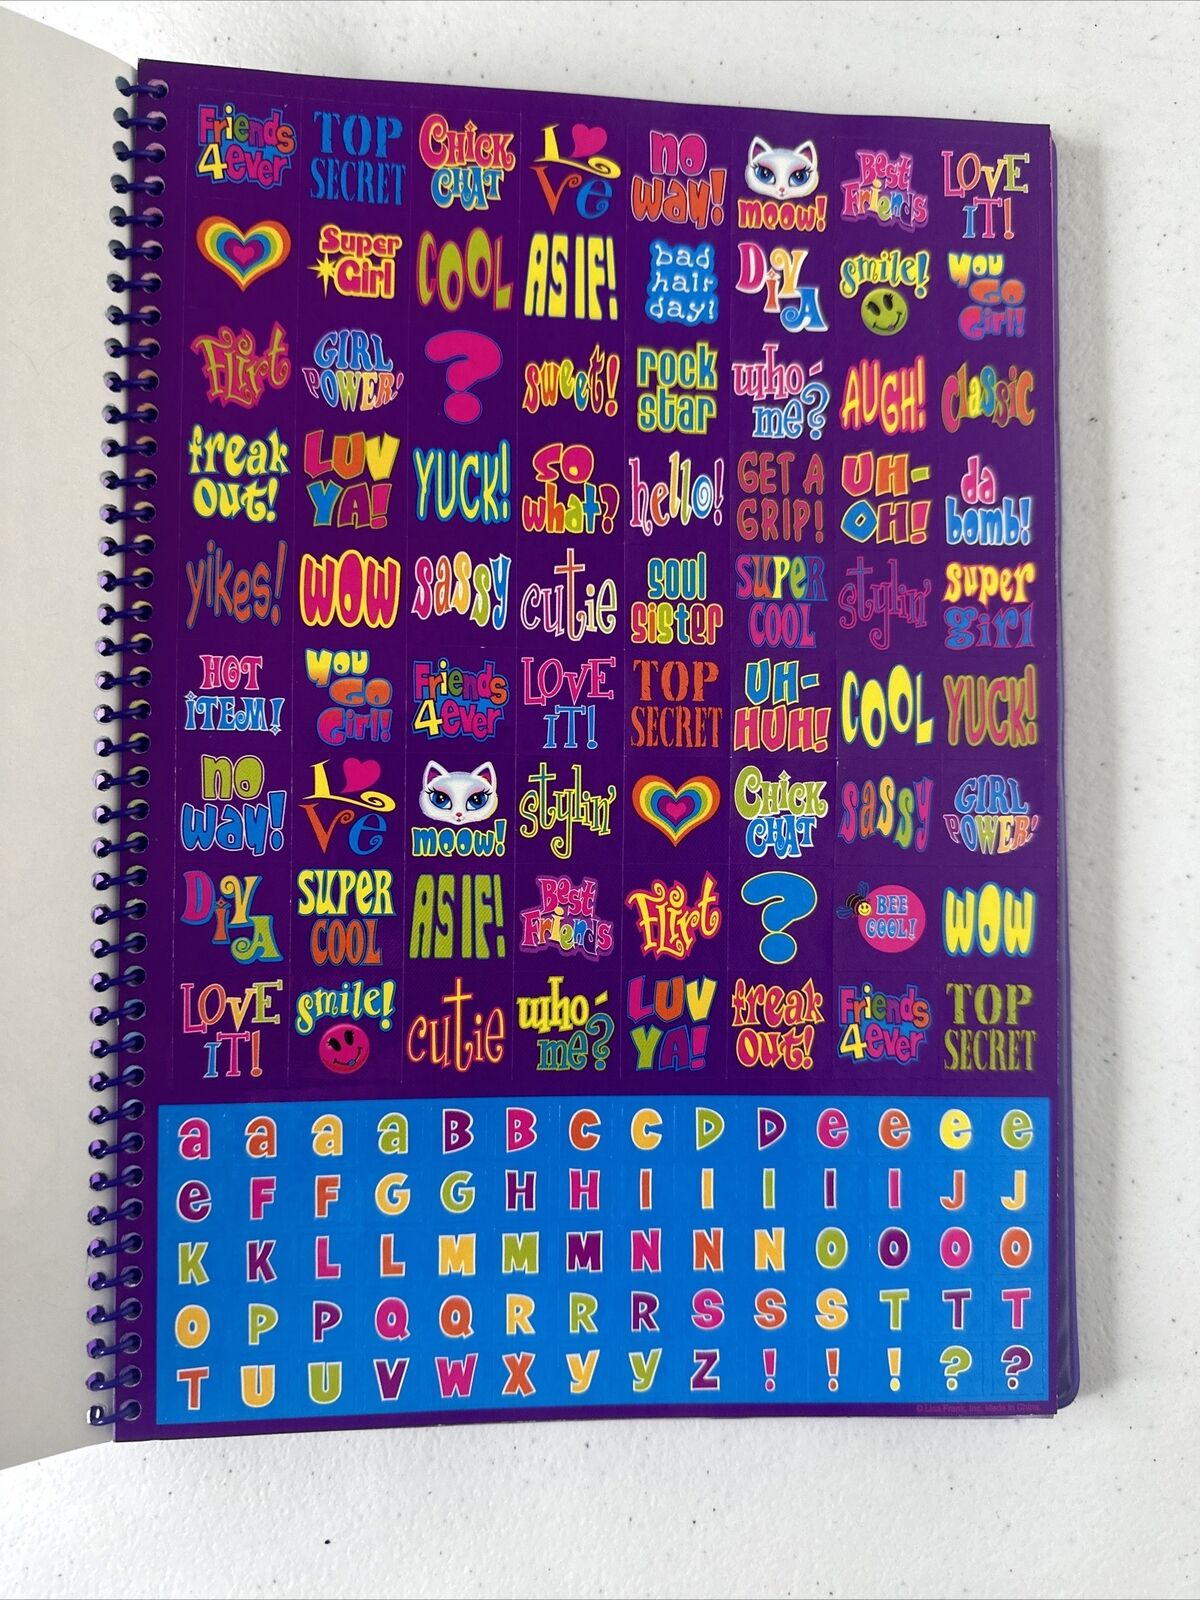 Vintage Mint Lisa Frank Friends 411 Notebook - Ultra-Rare Collectible Journal in New Condition - TreasuTiques